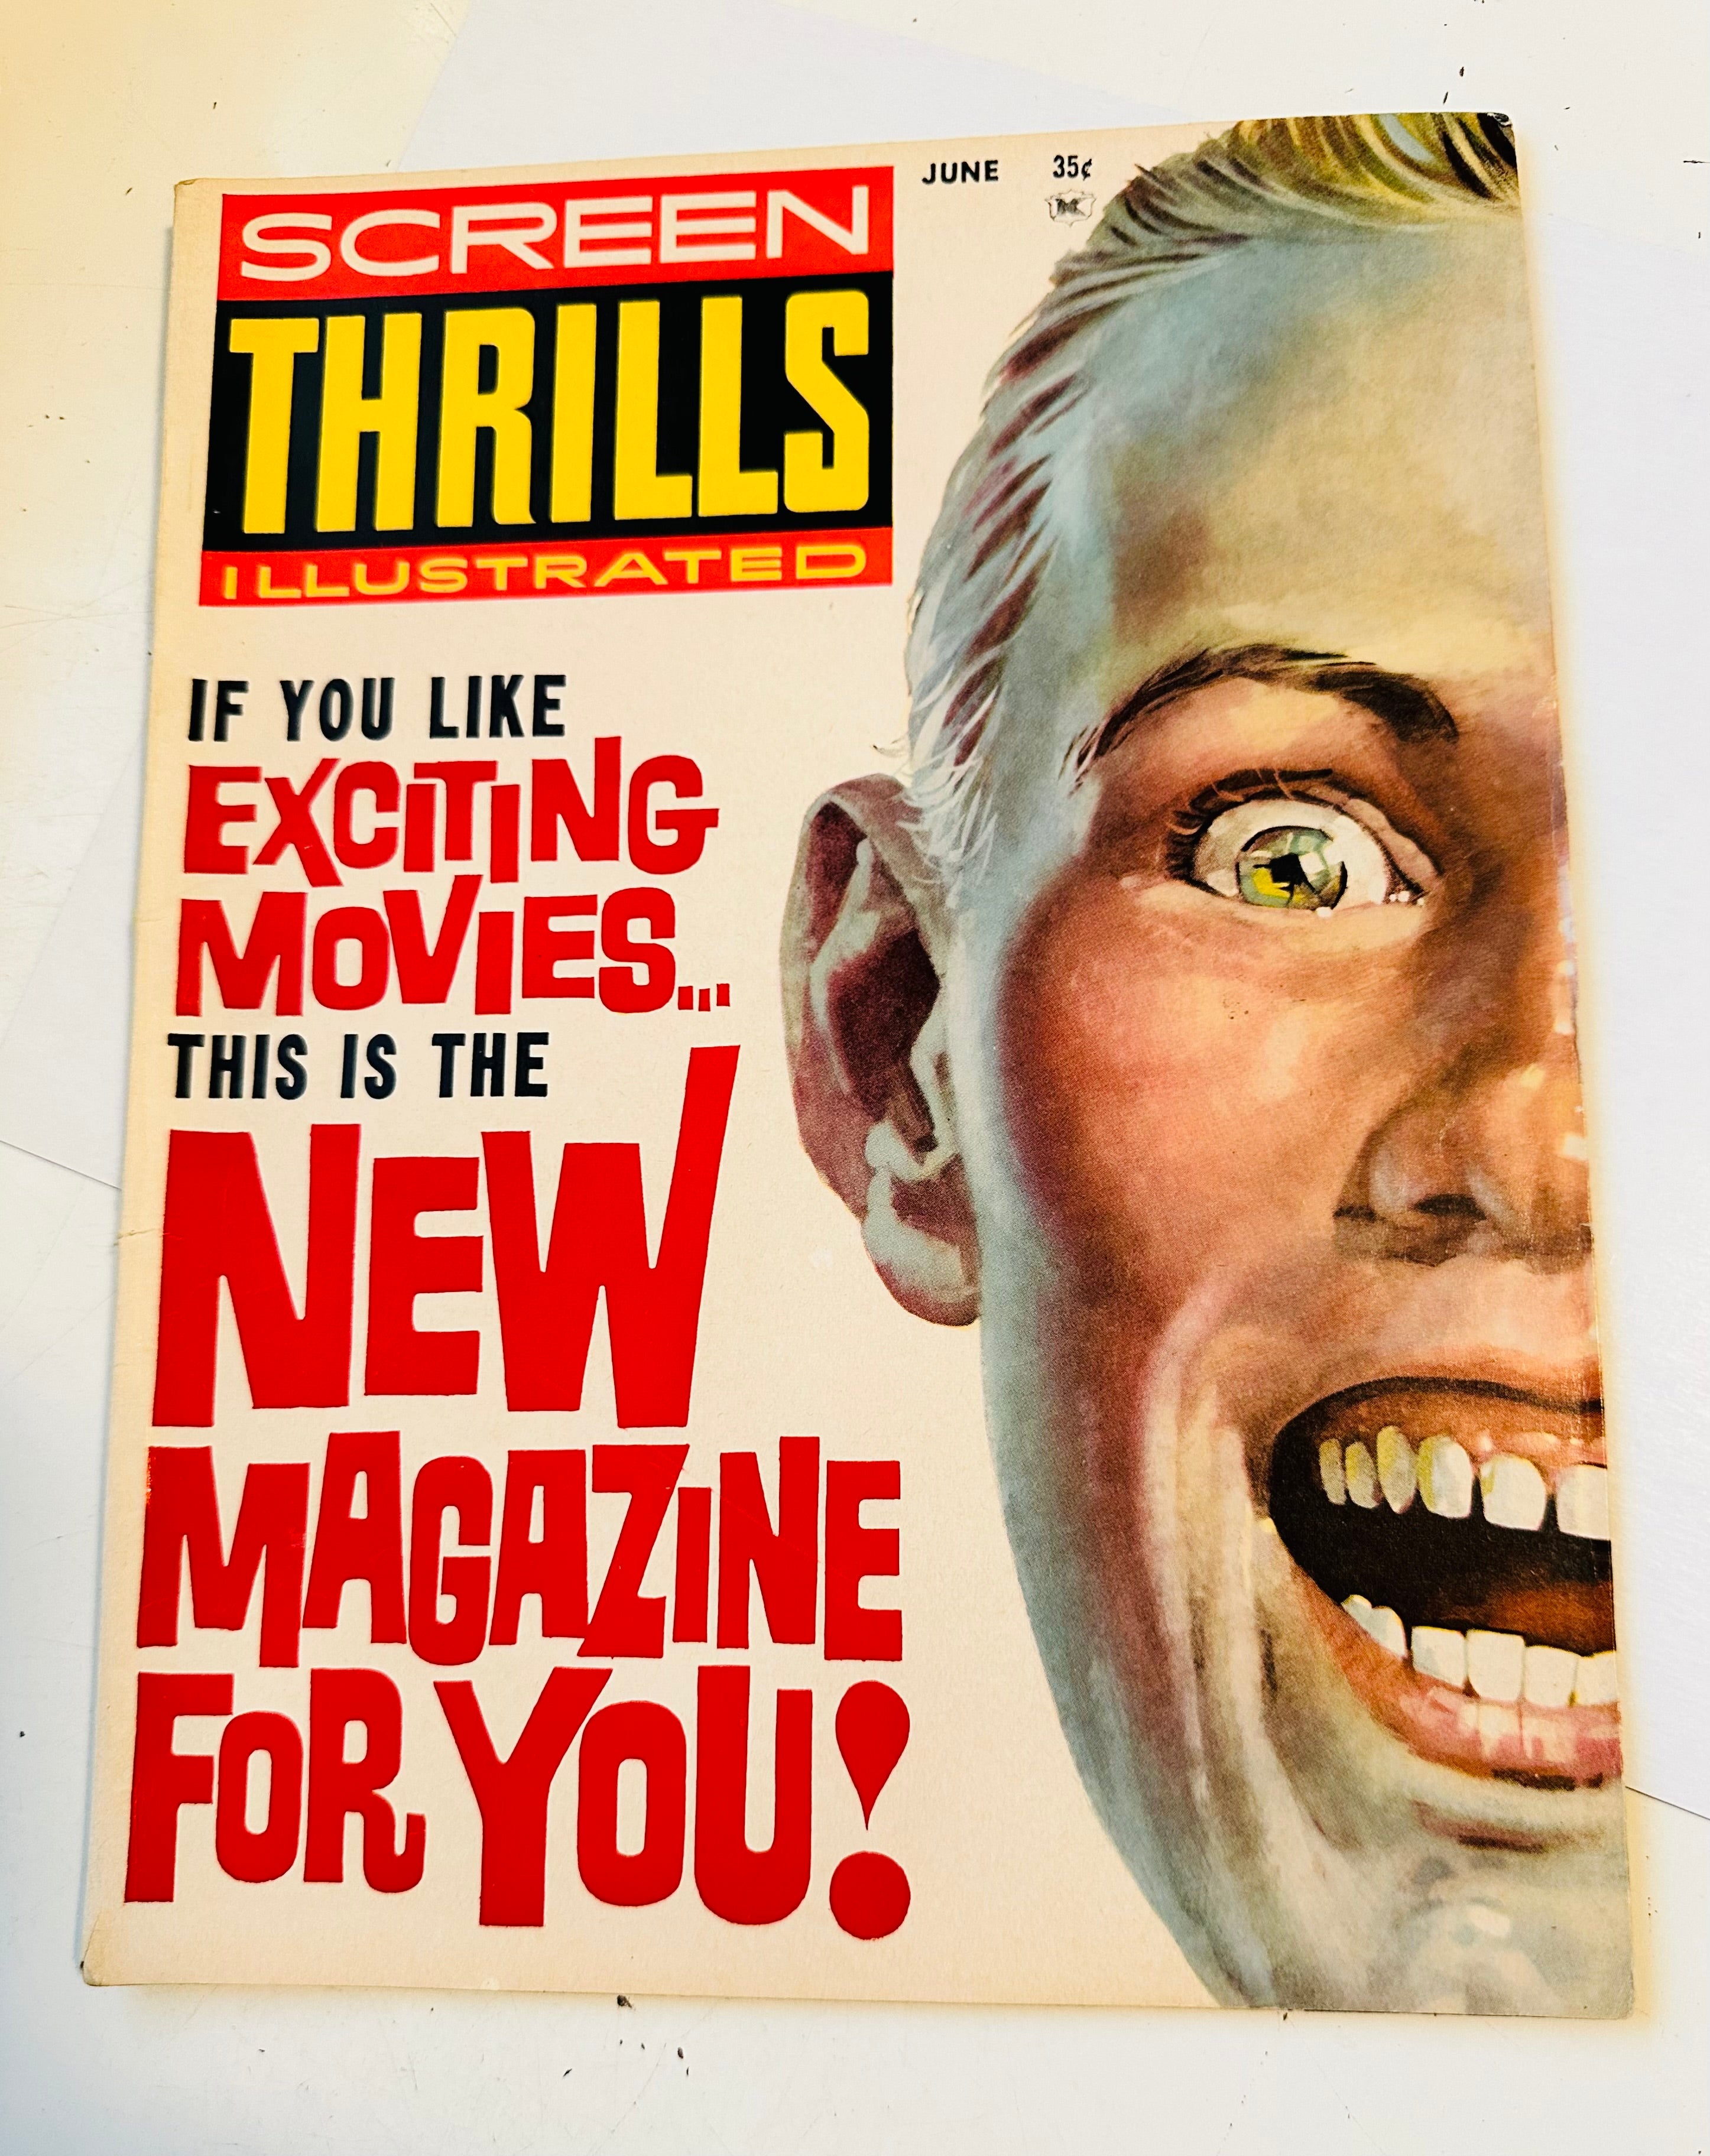 Screen thrills illustrated #1 rare high grade condition first issue 1962